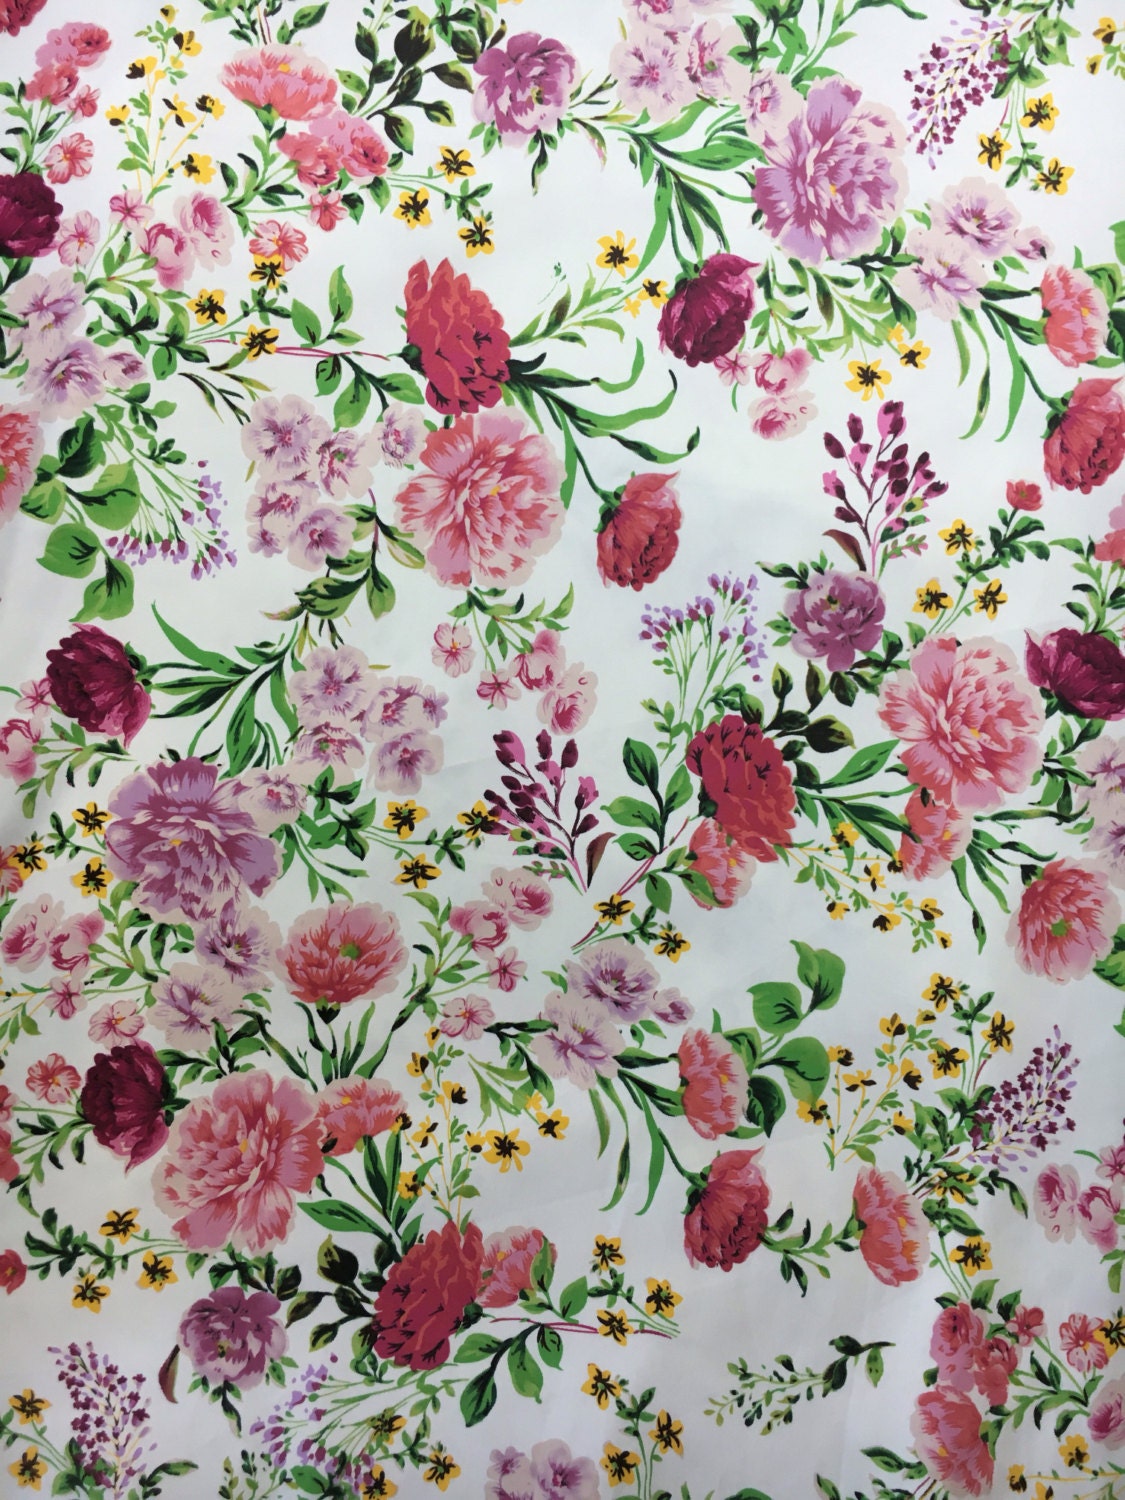 Spring flower fabric summer floral fabric craft by Valdenize